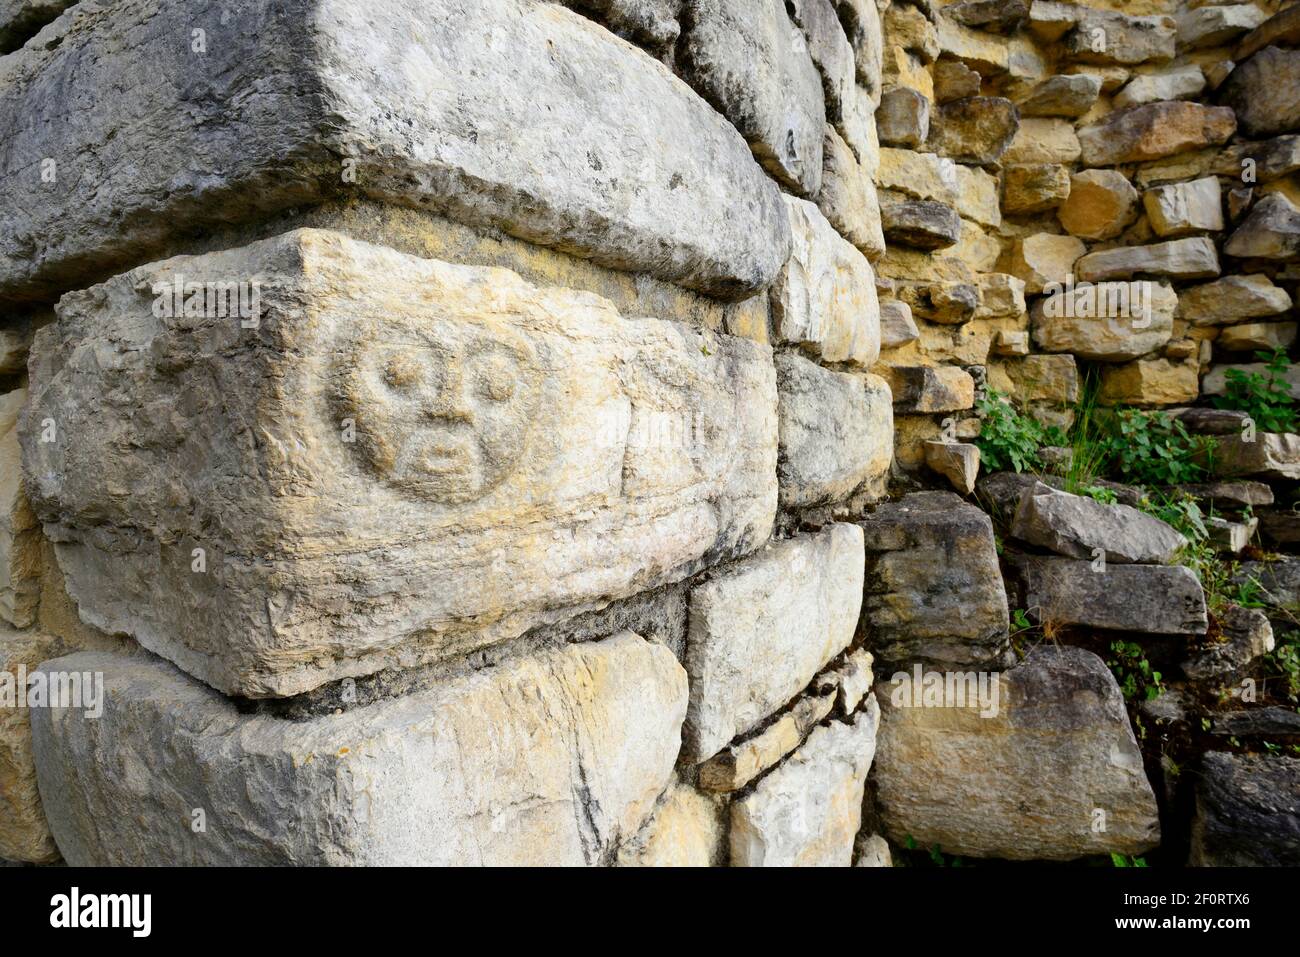 Face carved in stone at a ruin of the Chachapoyo culture, Kuelap, Luya province, Amazonas region, Peru Stock Photo